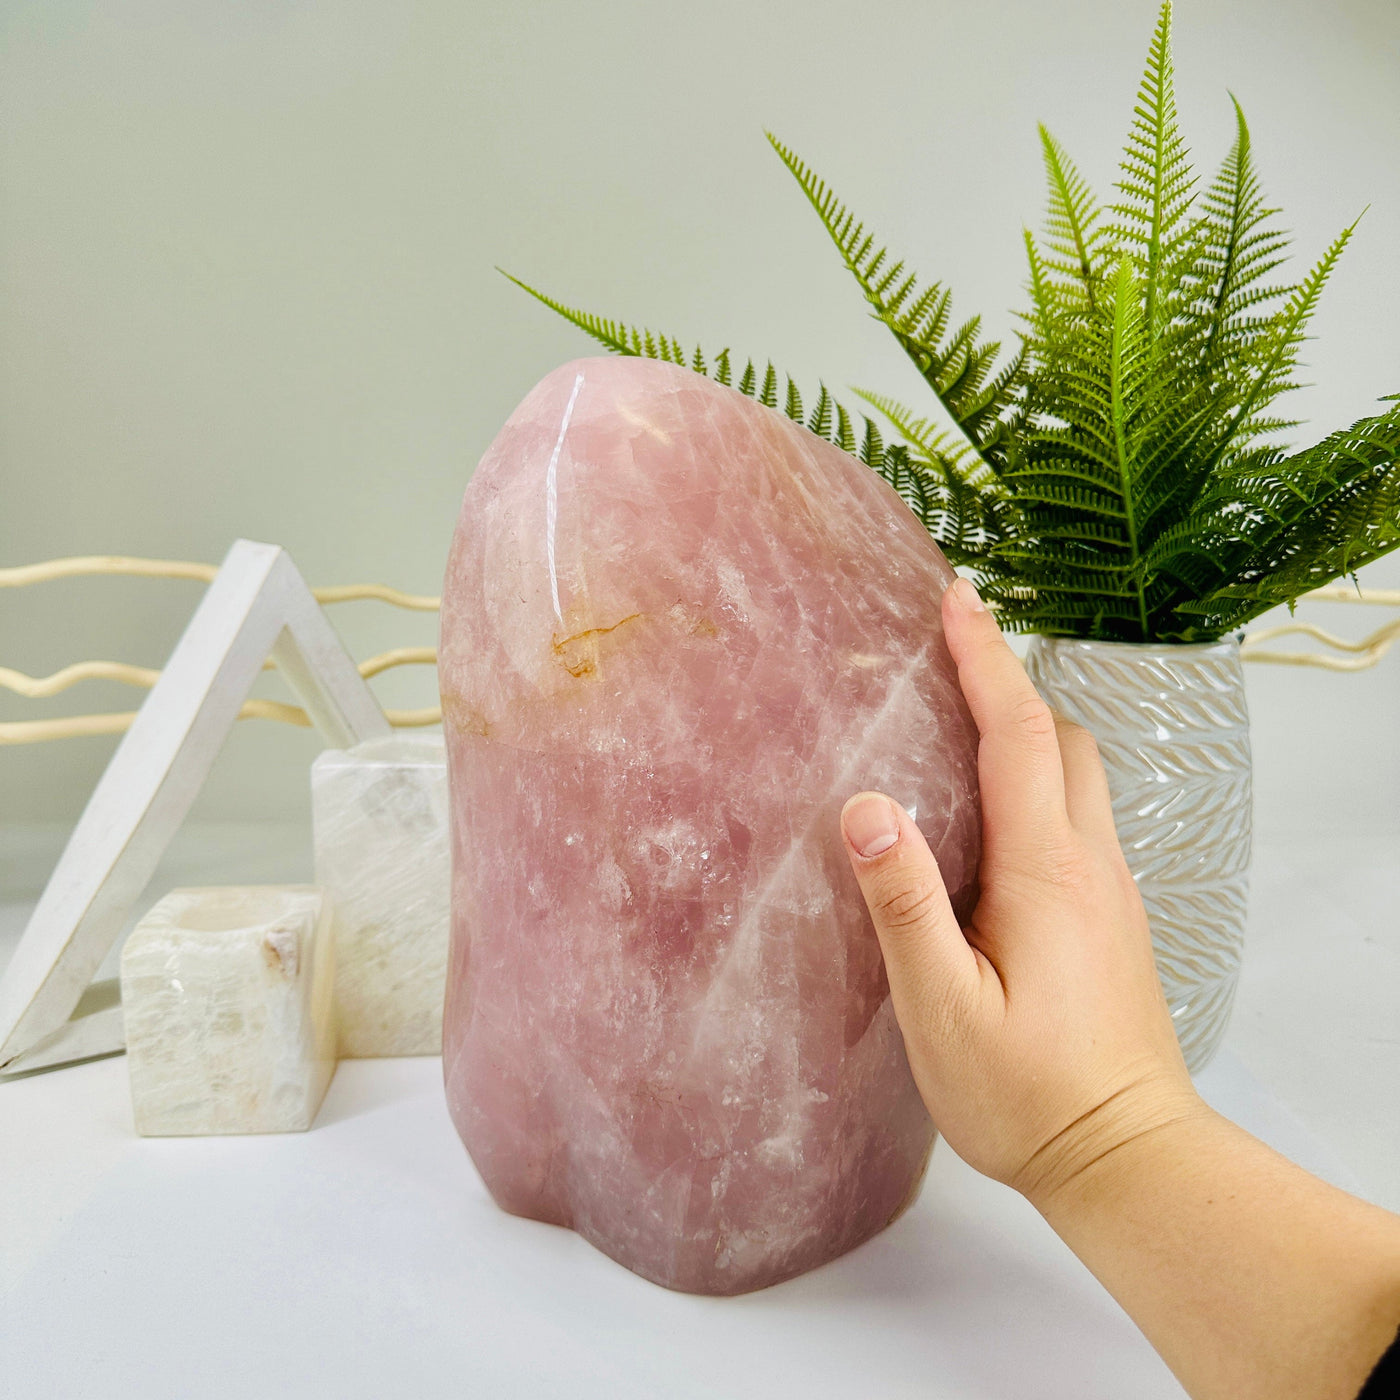 Rose Quartz Freeform Cut Base Crystal with hand for size reference